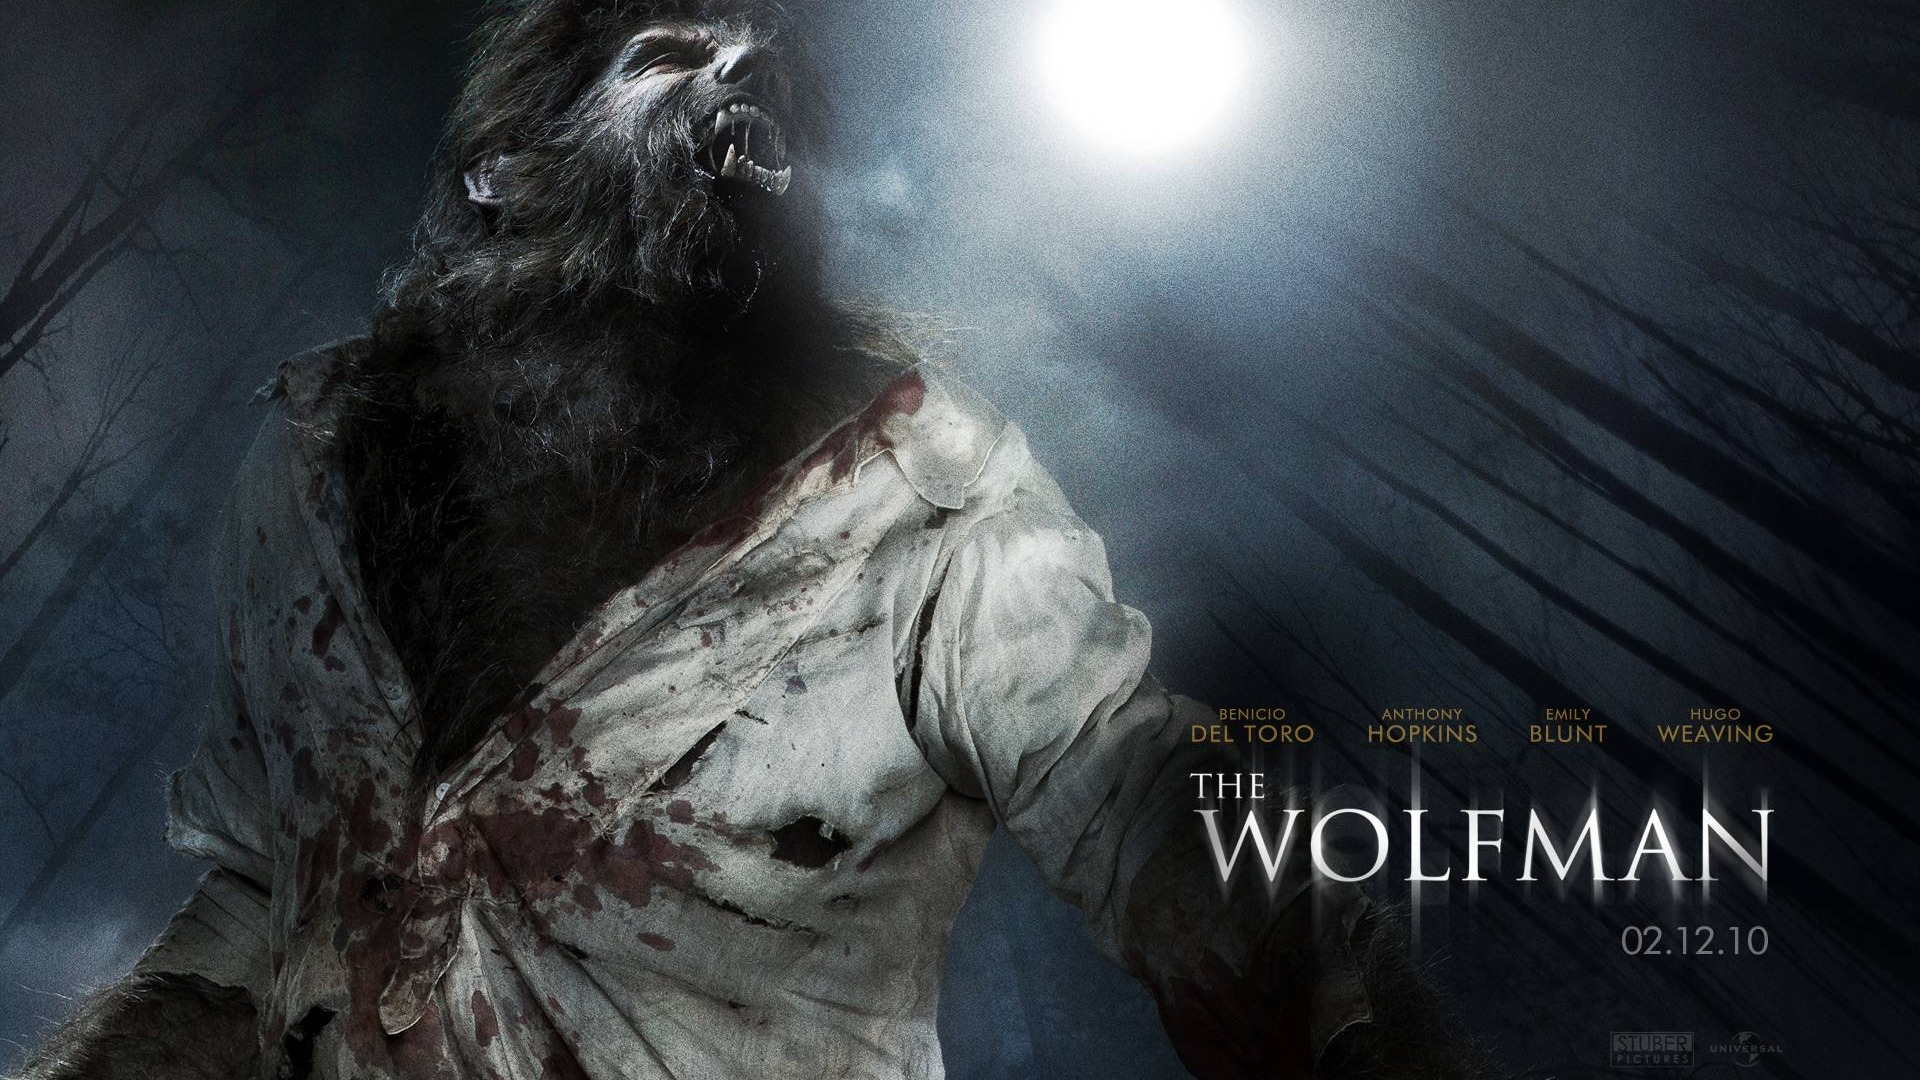 The Wolfman Movie Wallpapers #3 - 1920x1080